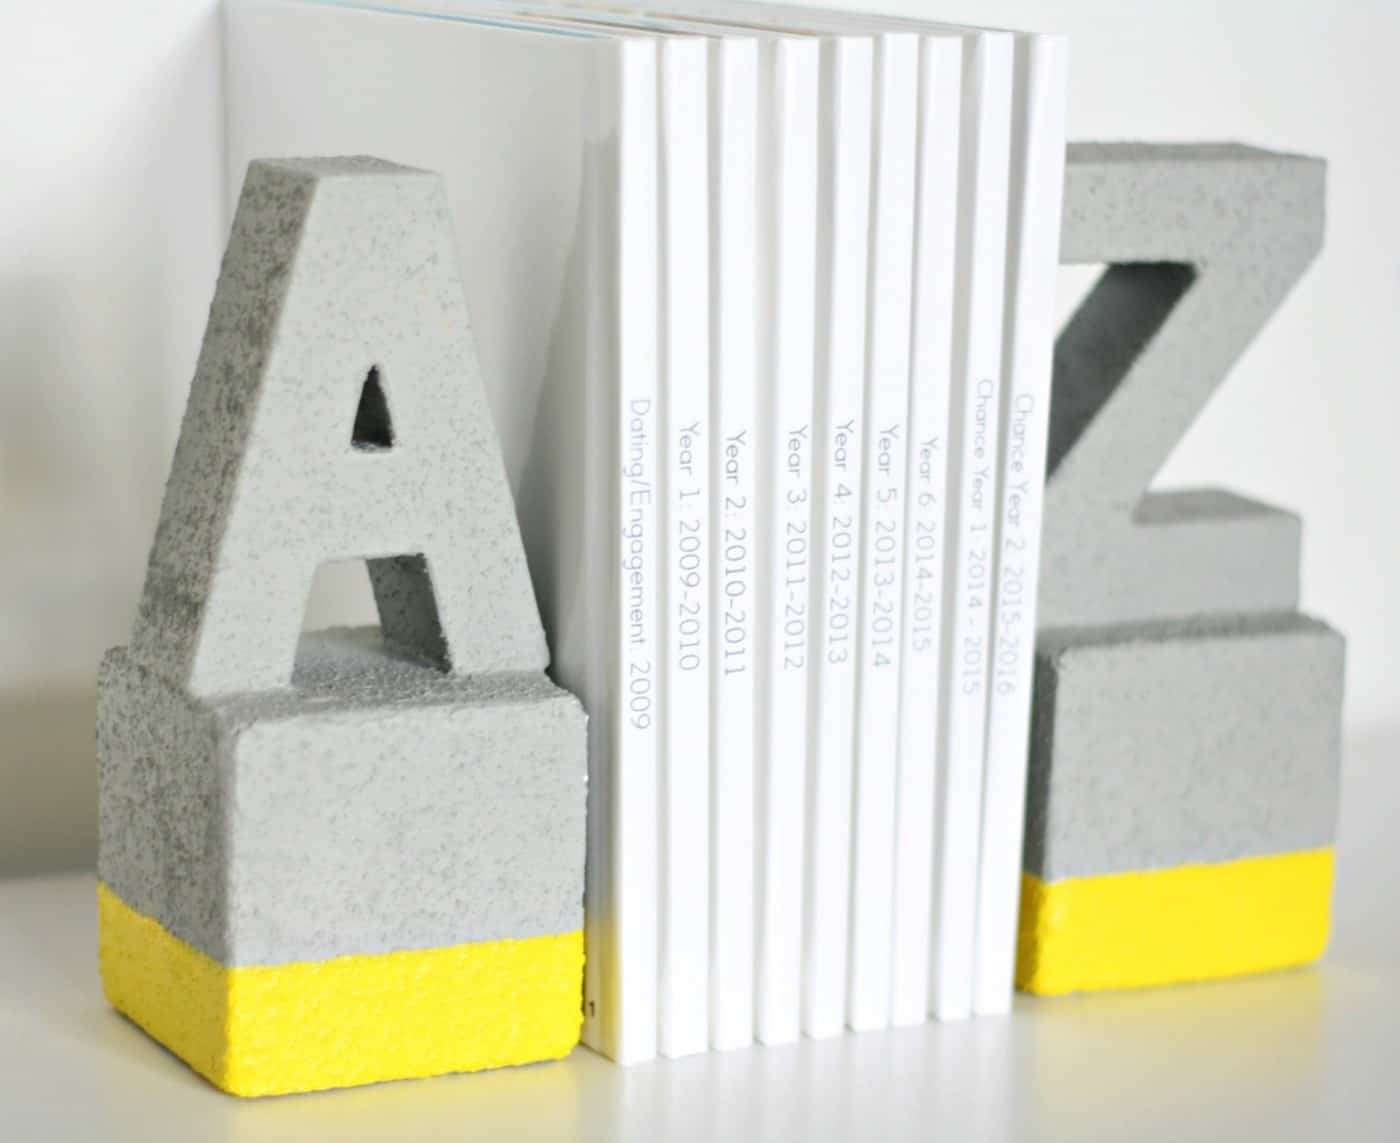 Use this fun tutorial with FolkArt Painted Finishes, FloraCraft foam, and Smooth Finish to create these awesome faux cement DIY book ends!